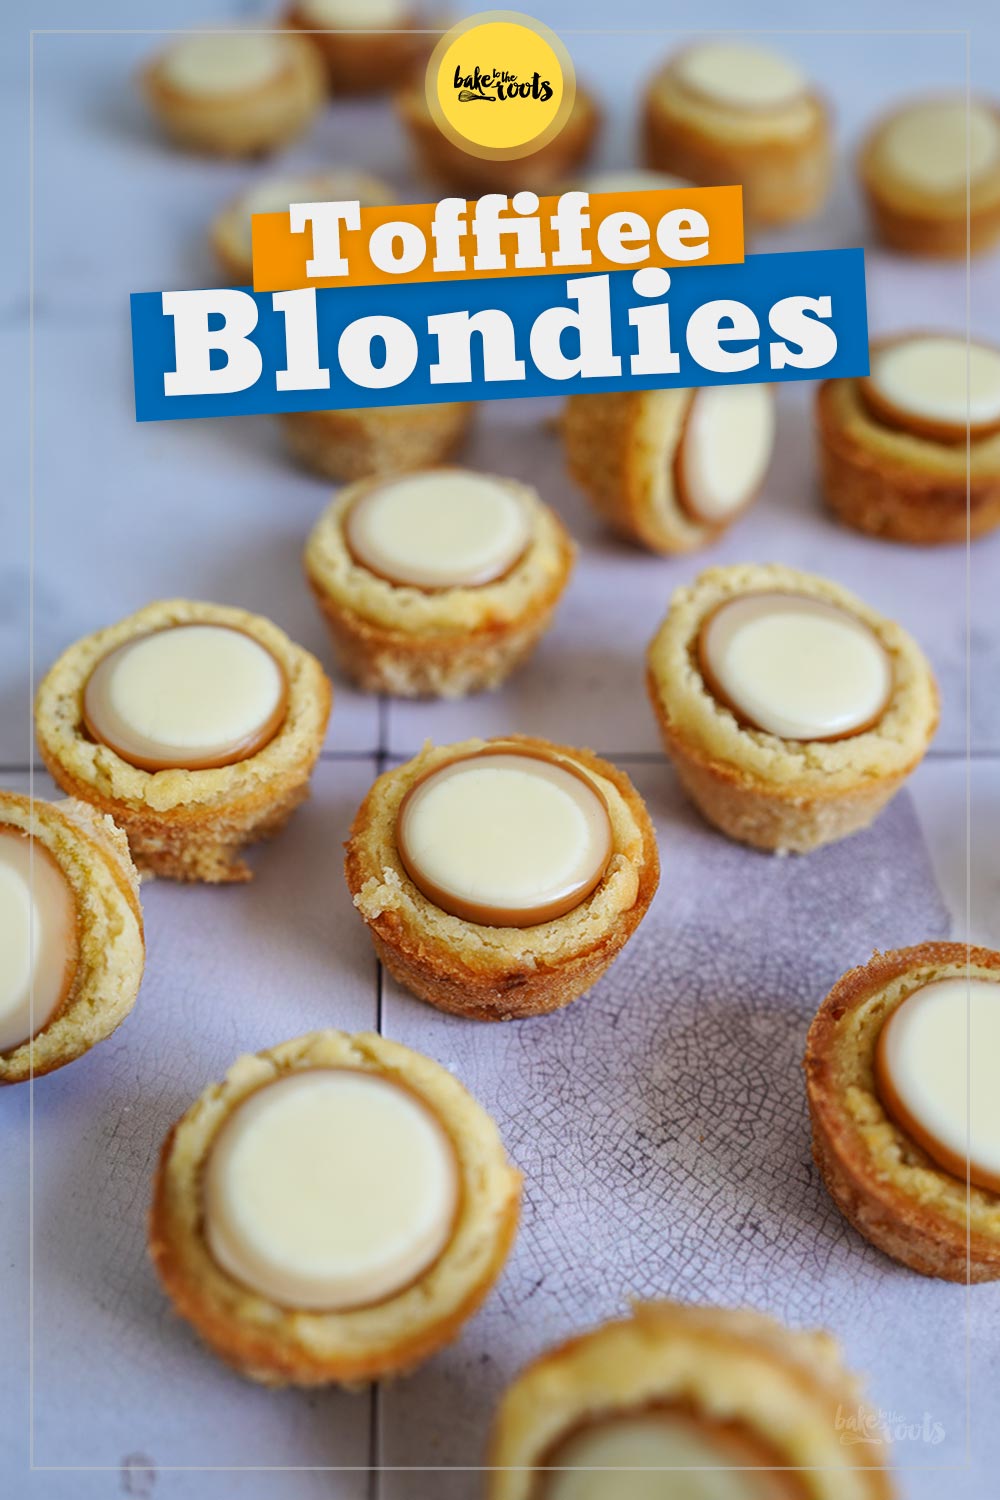 Mini Blondie Bites with Toffifee | Bake to the roots